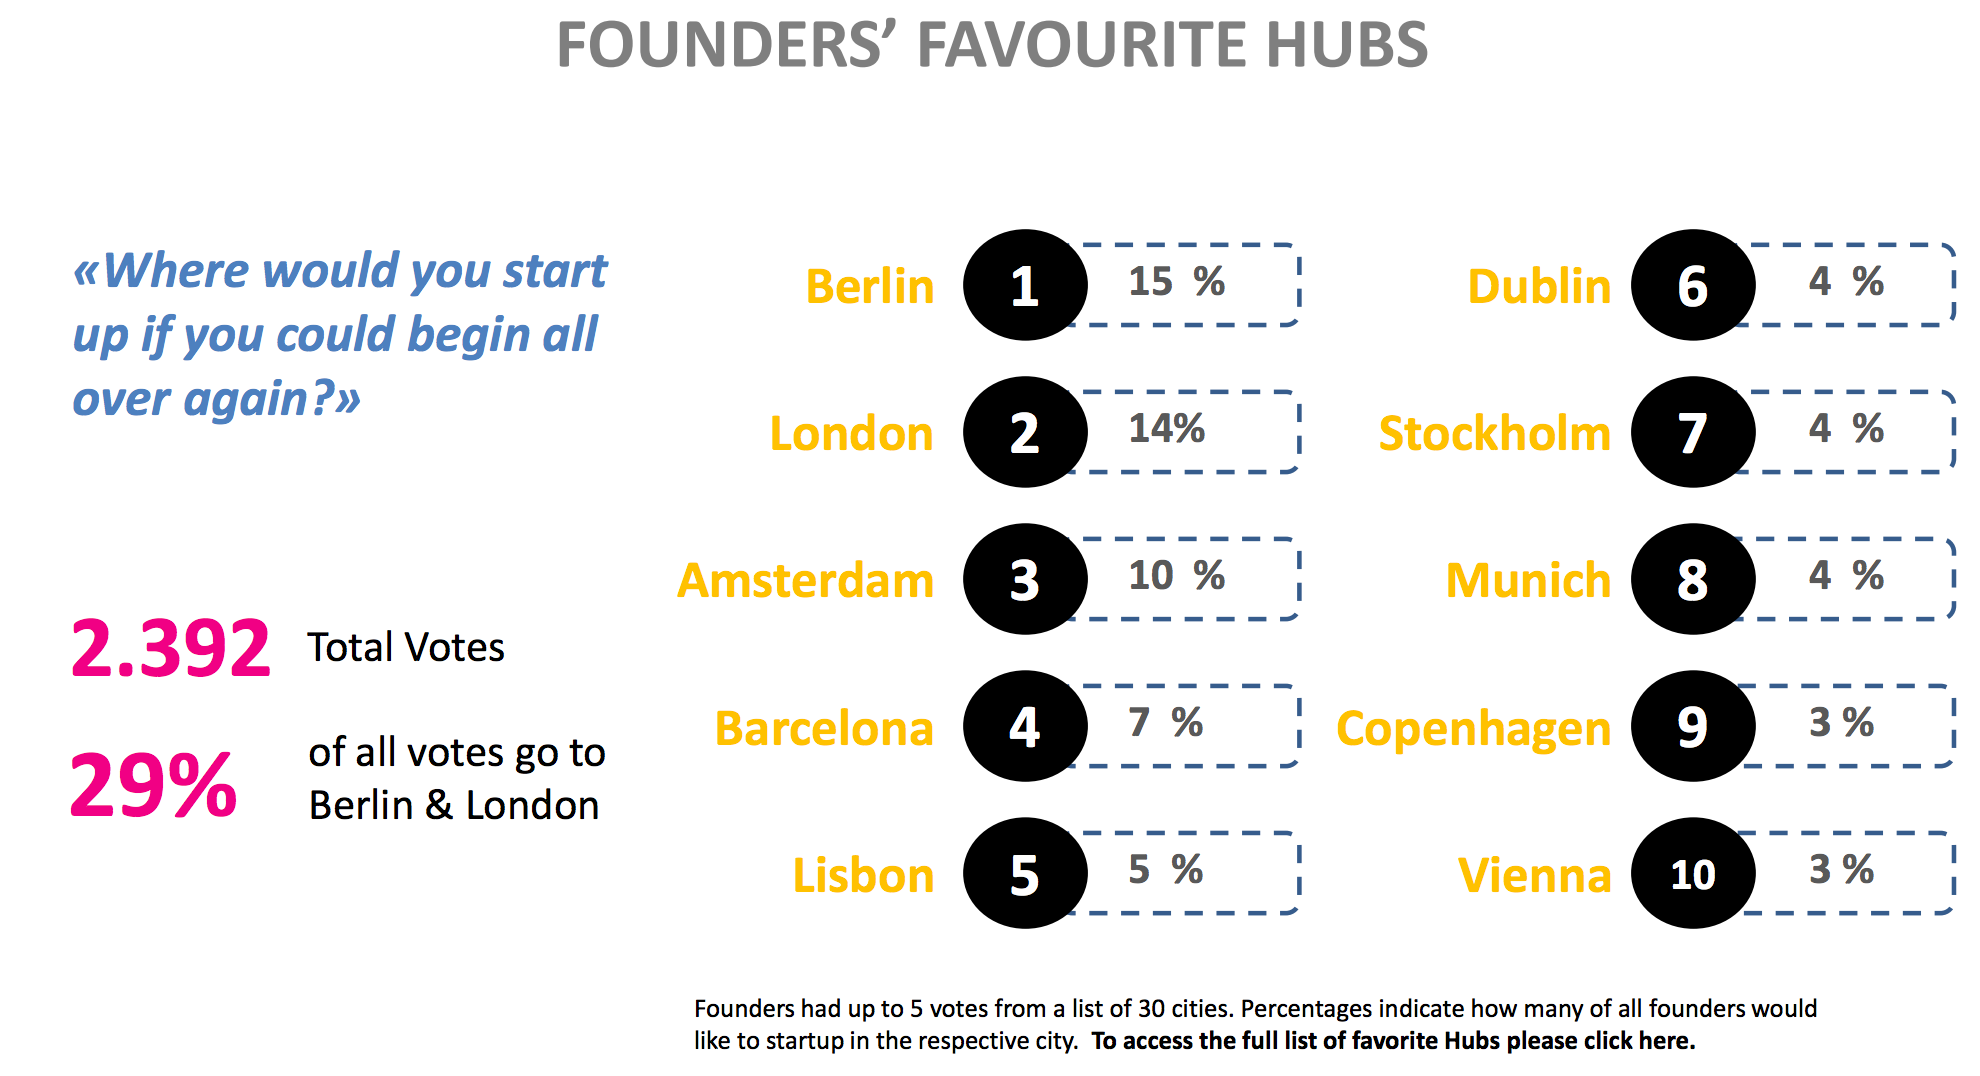 The favorite hubs of startup founders